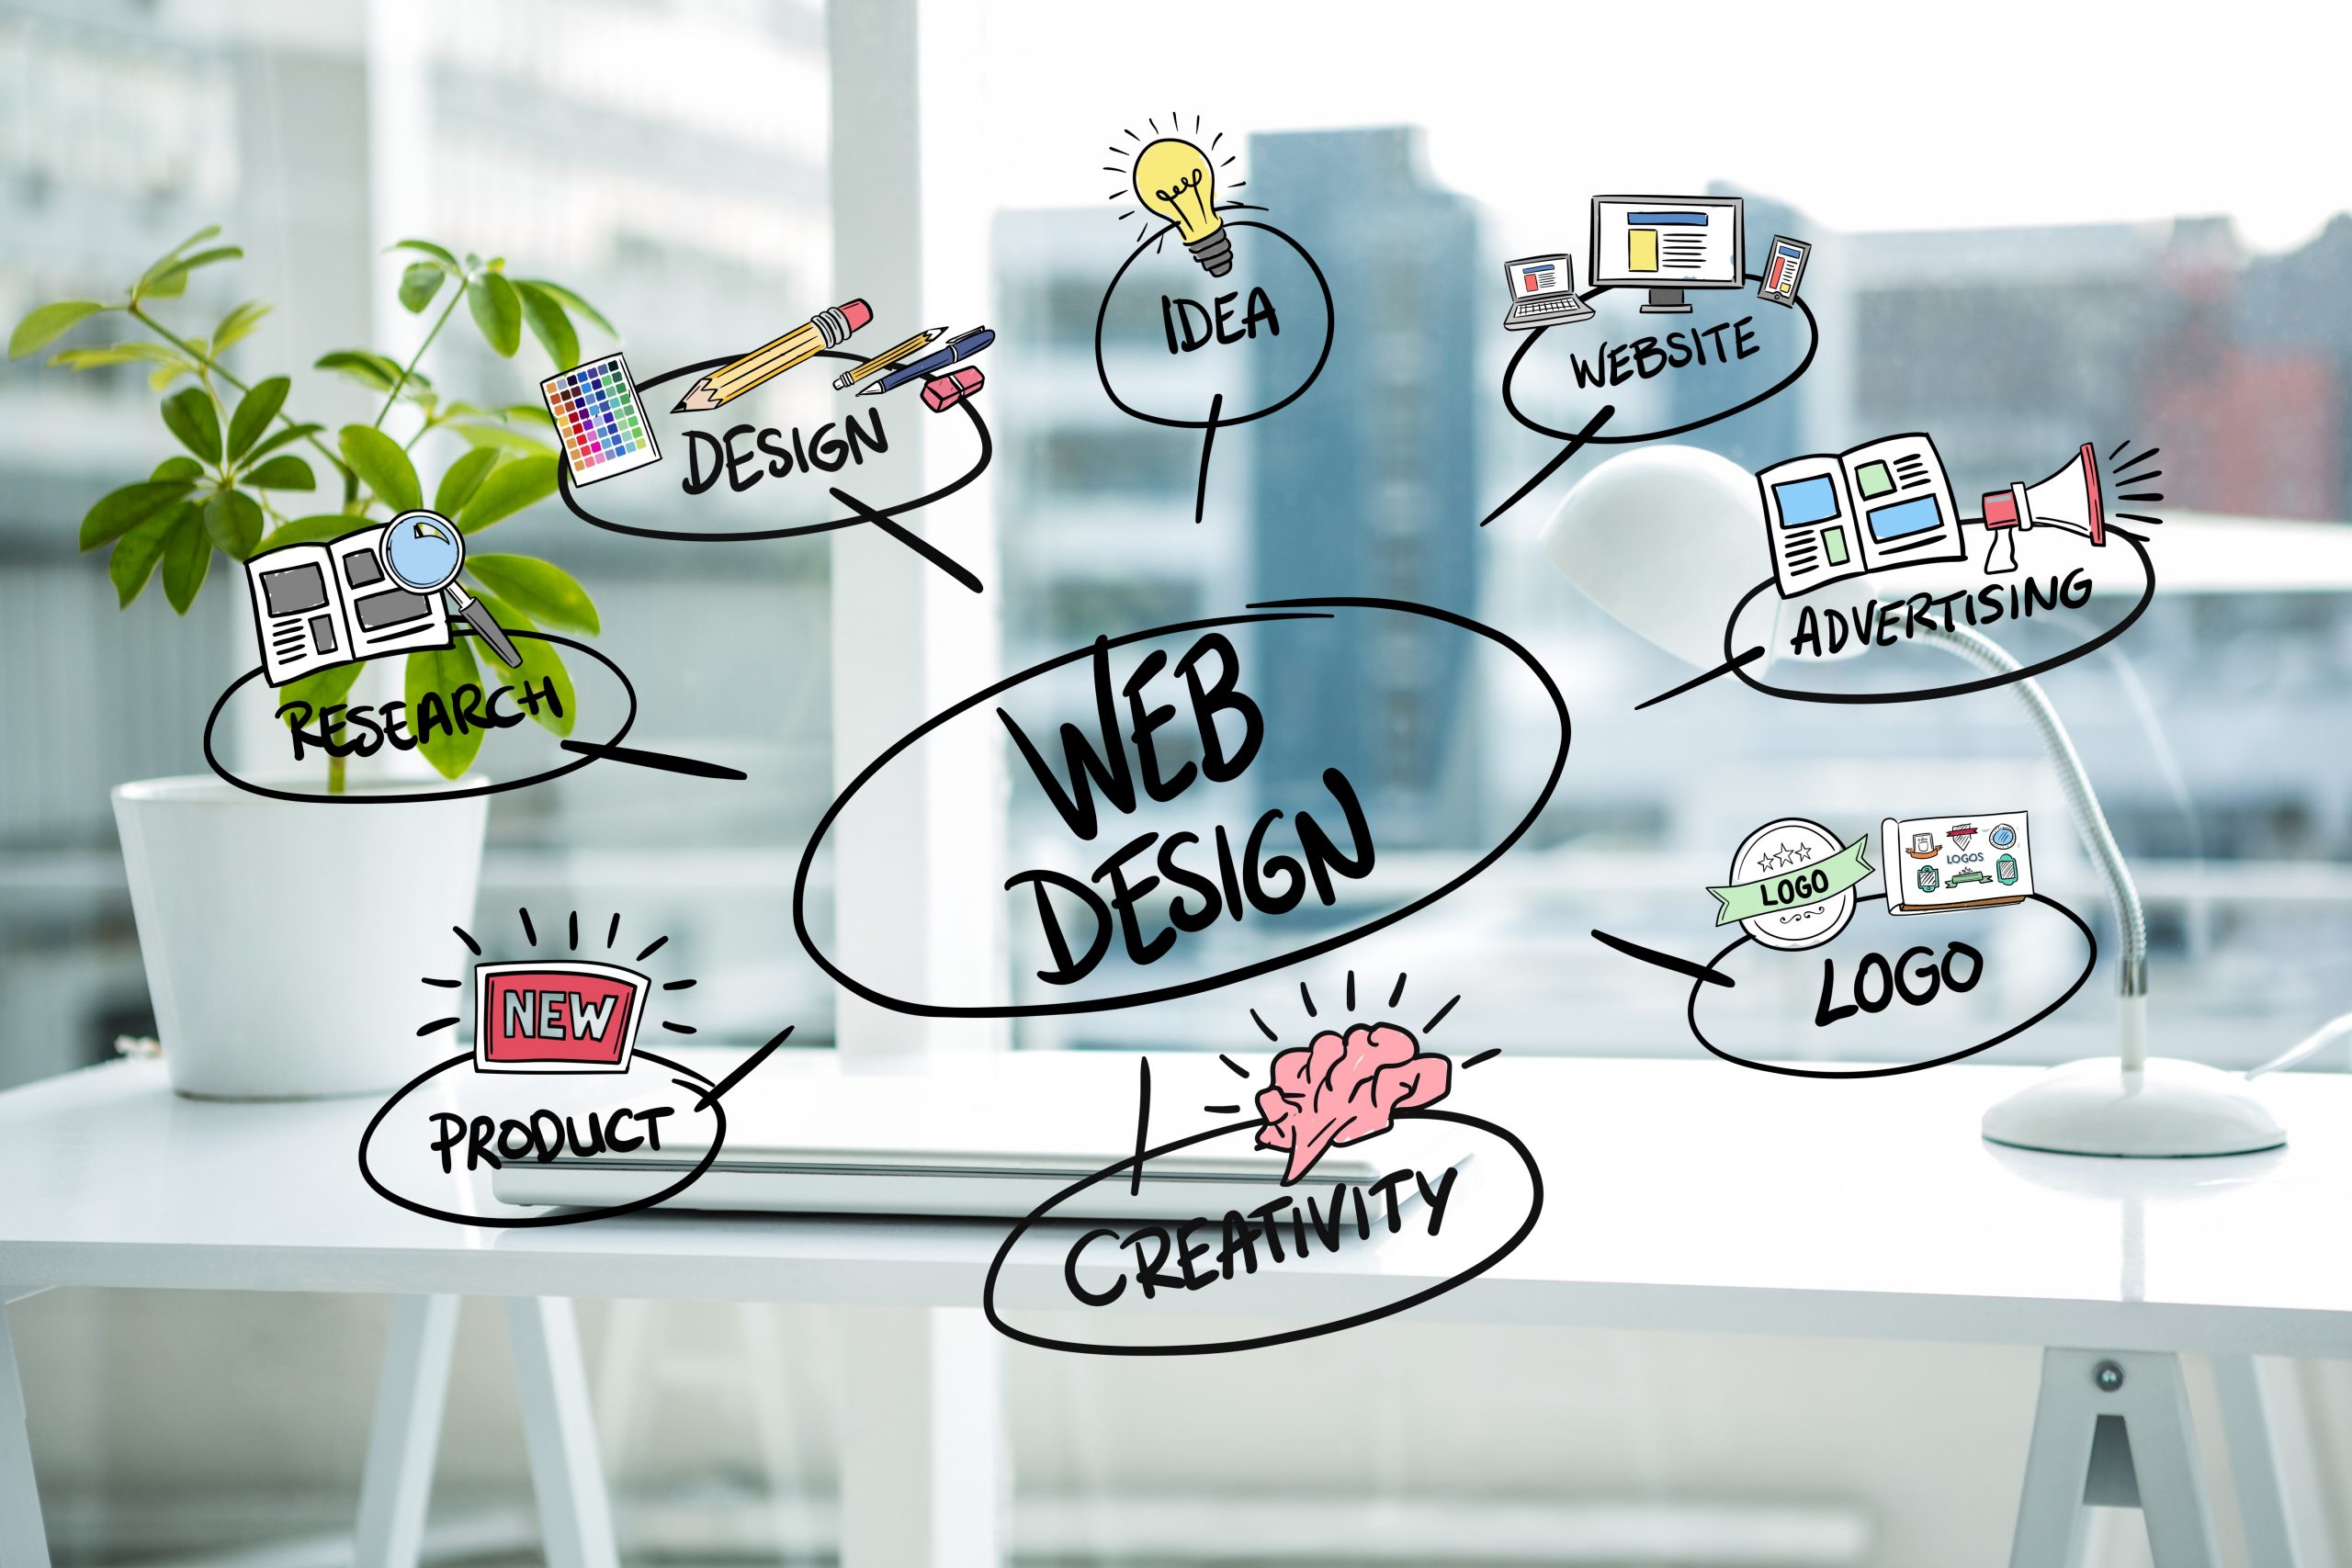 Visual Web Design Advice and Best Practices